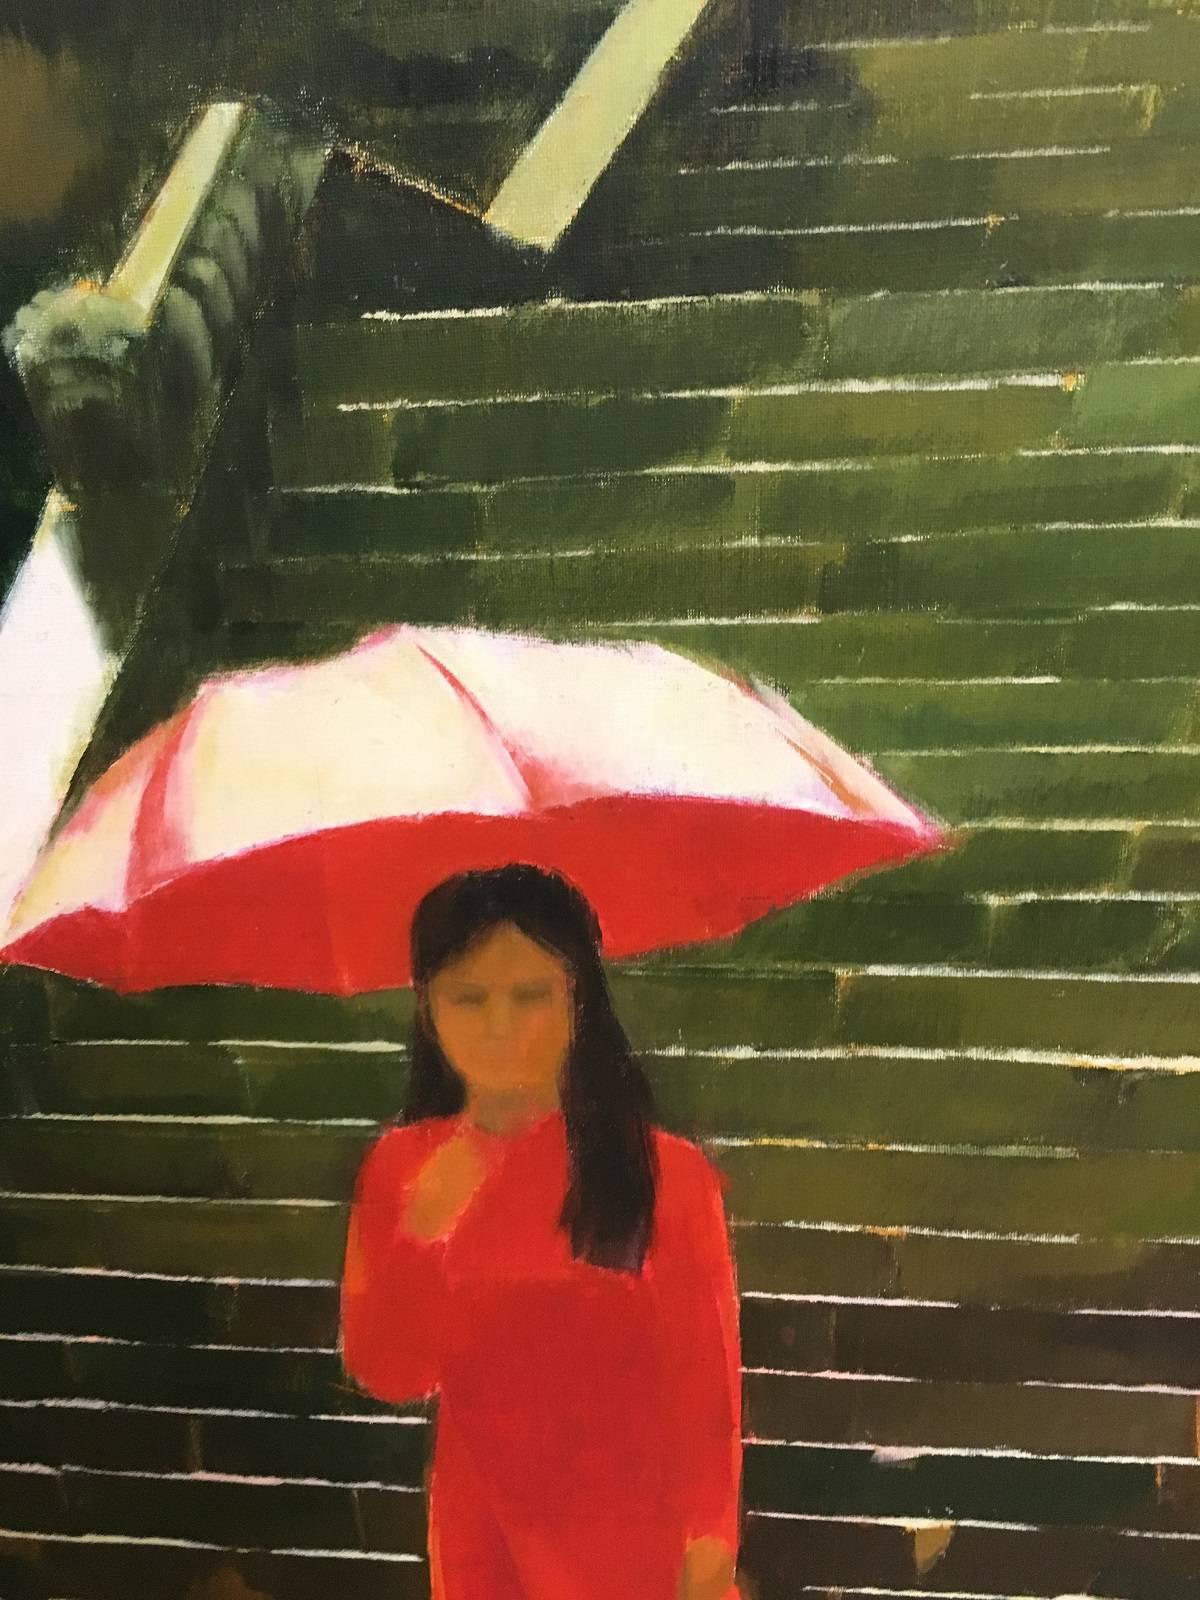 ‘Red Umbrella’ is a large figurative oil on canvas exterior painting created by Vietnamese artist Le Nhu Ha in 2012. The painting depicts the exterior façade of a Vietnamese building's front steps. A woman with a red umbrella walks down in the